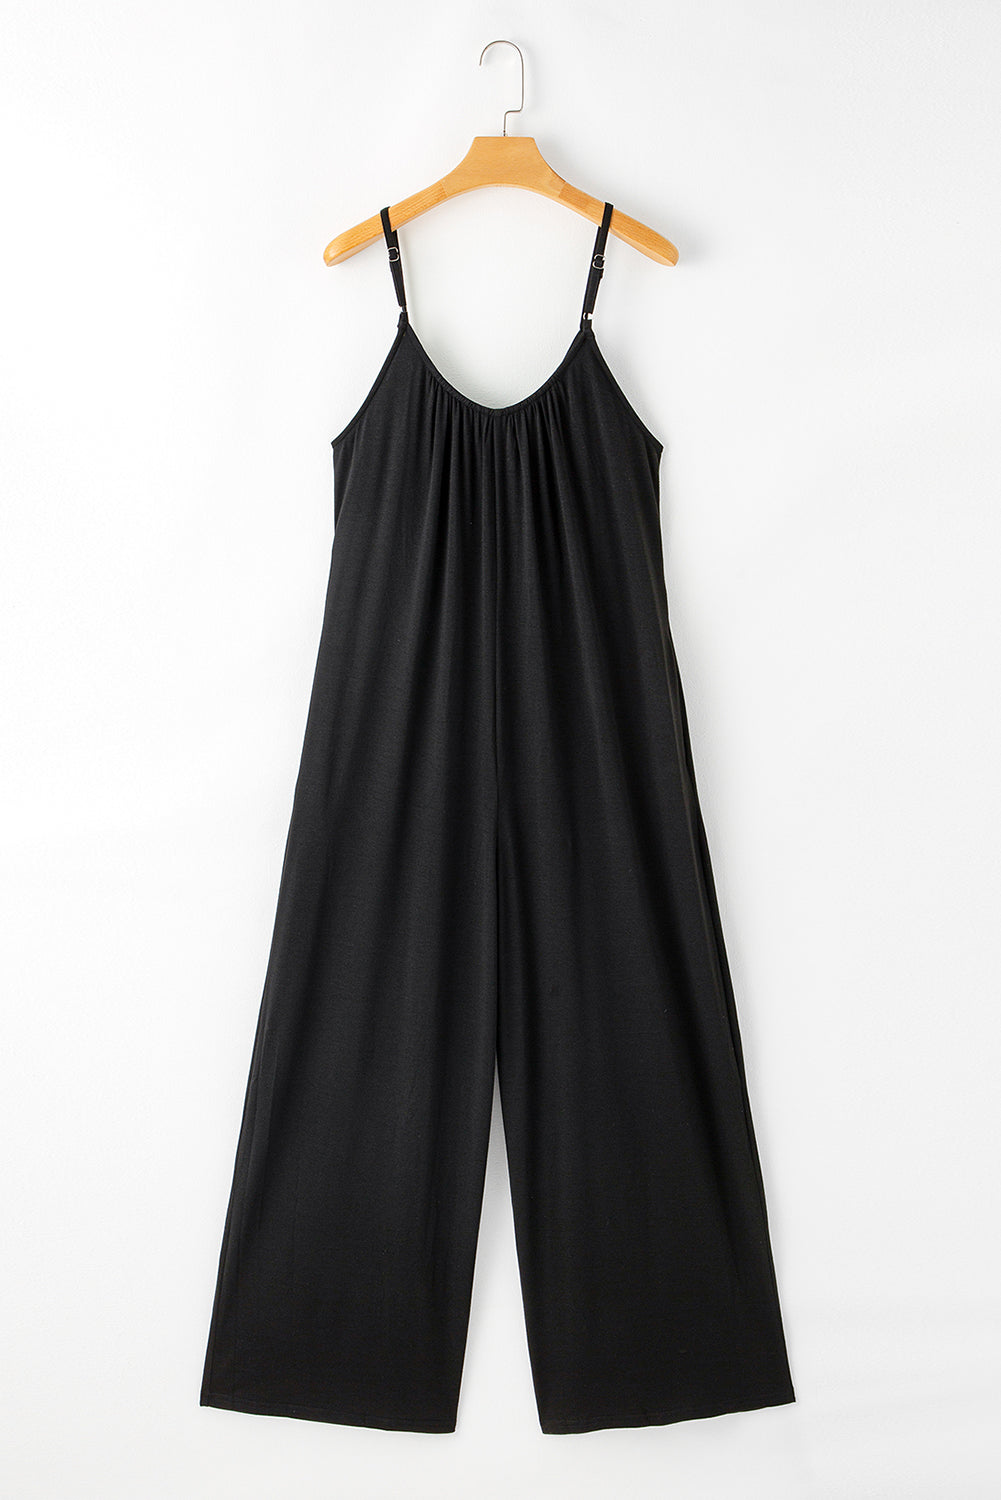 - Black Adjustable Knotted Spaghetti Straps Women's Wide Leg Jumpsuit - womens jumpsuit at TFC&H Co.